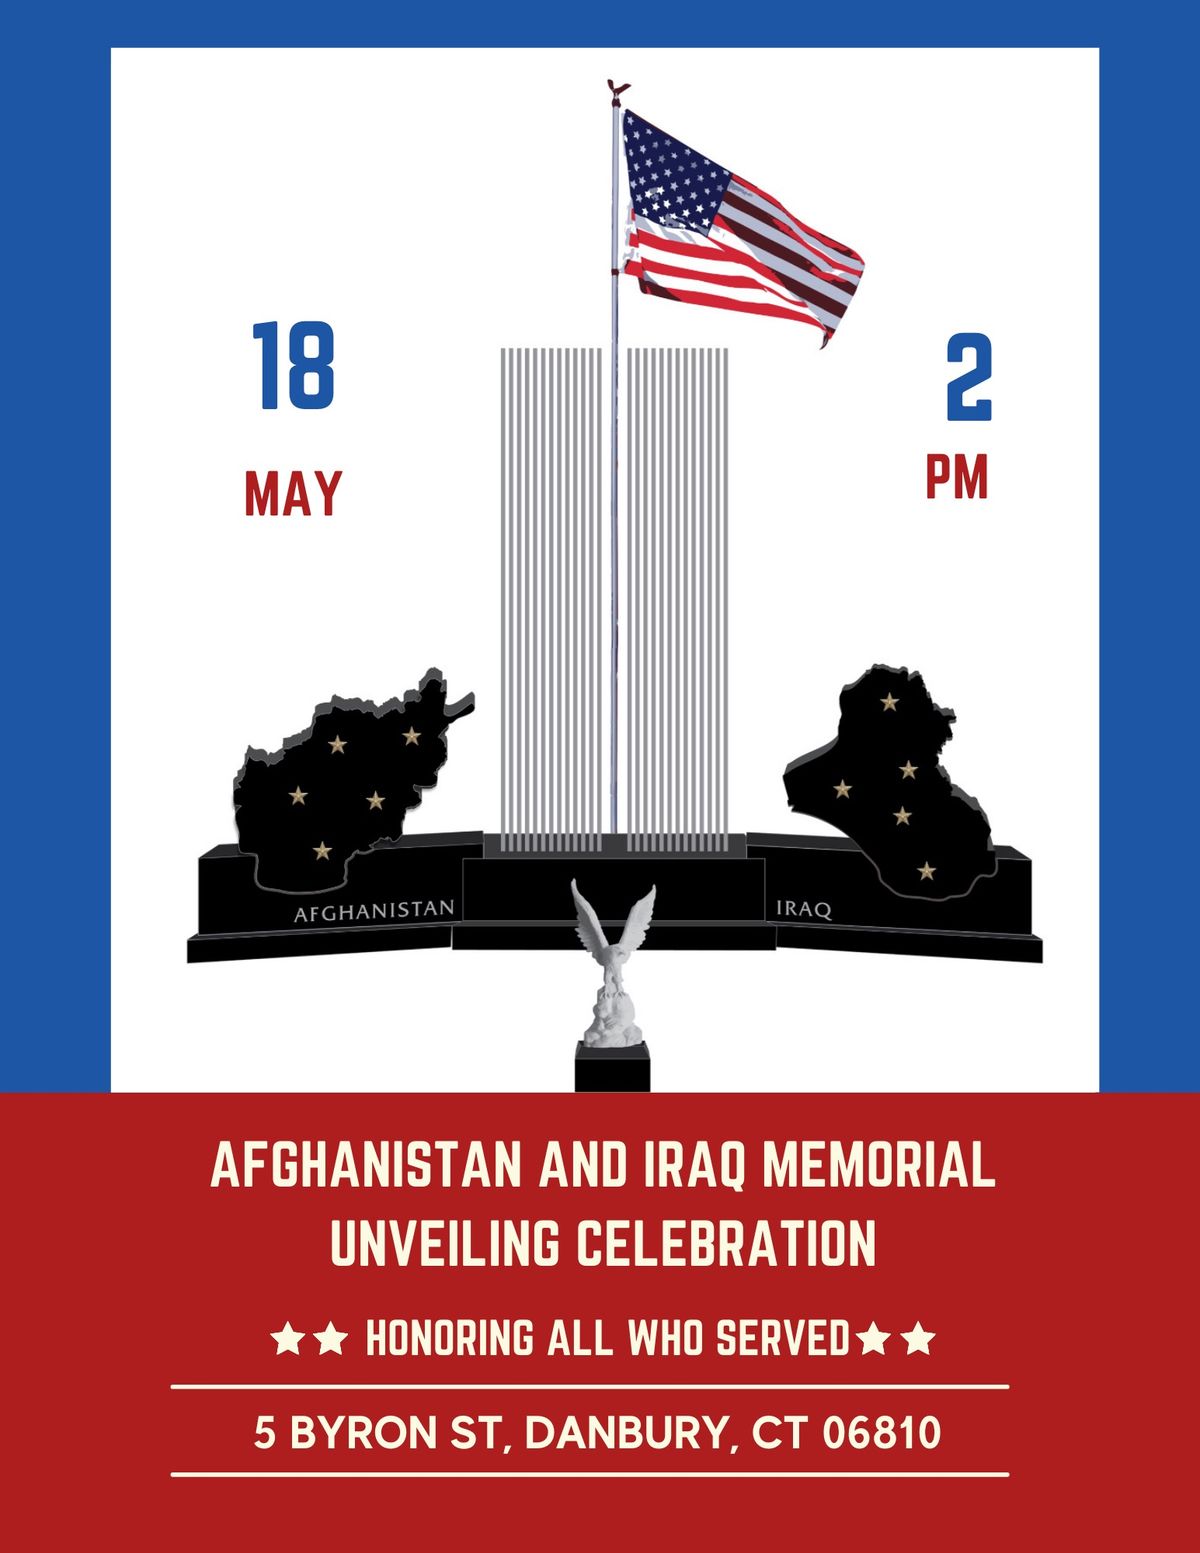 Afghanistan and Iraq War Memorial unveiling celebration 